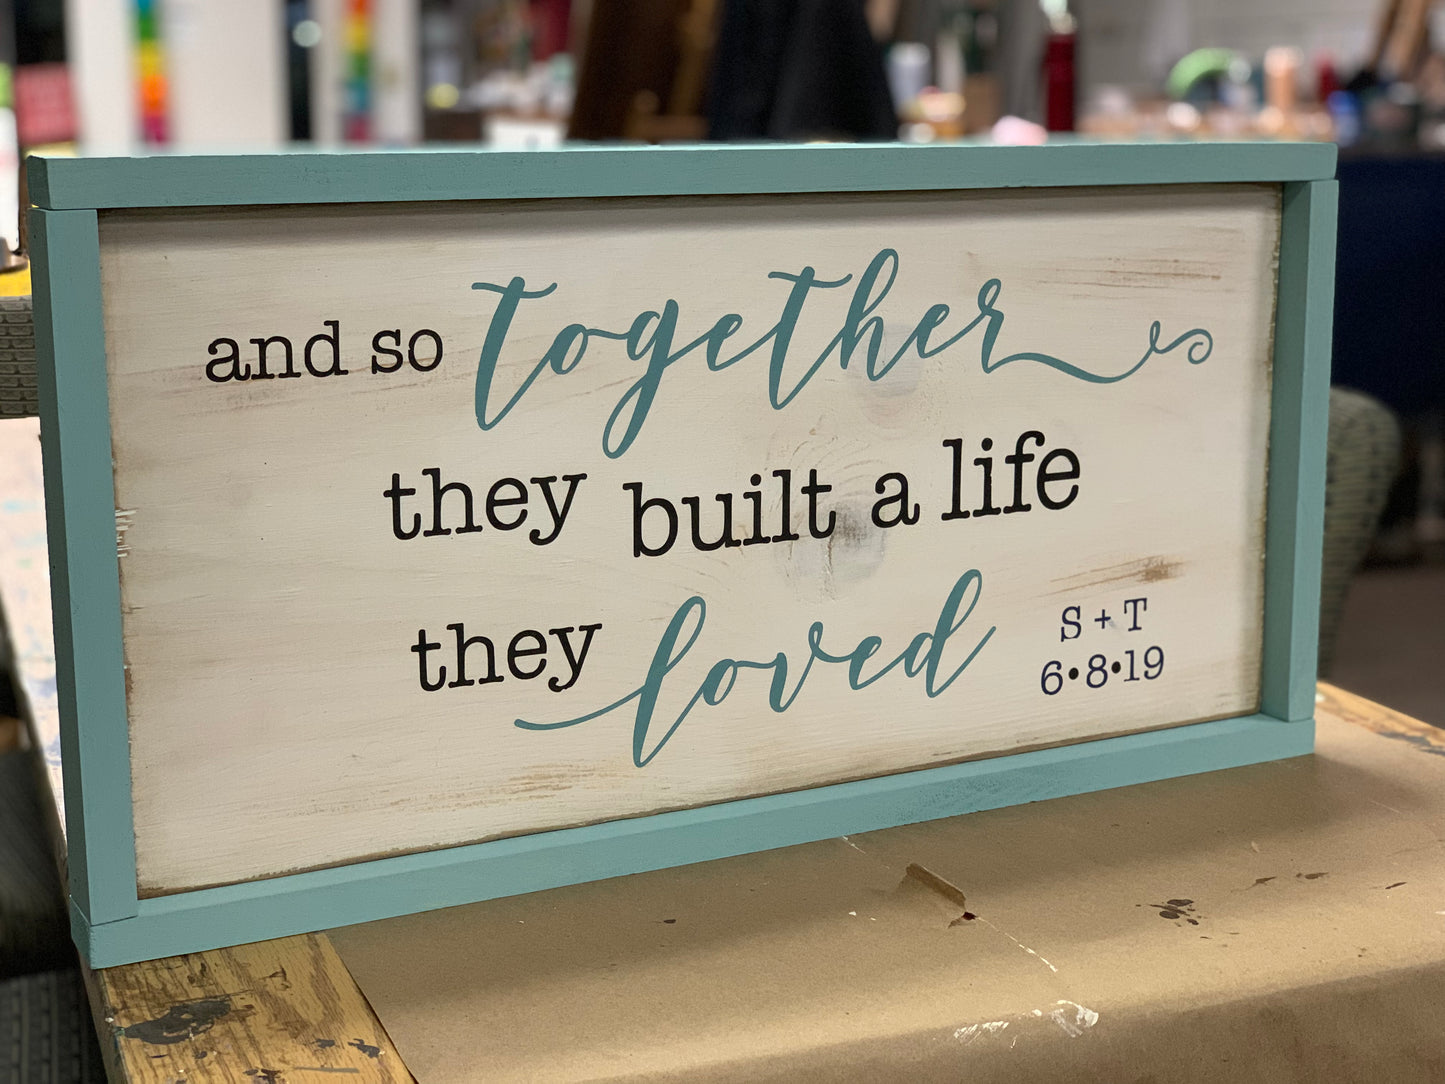 And so together they build a life they loved